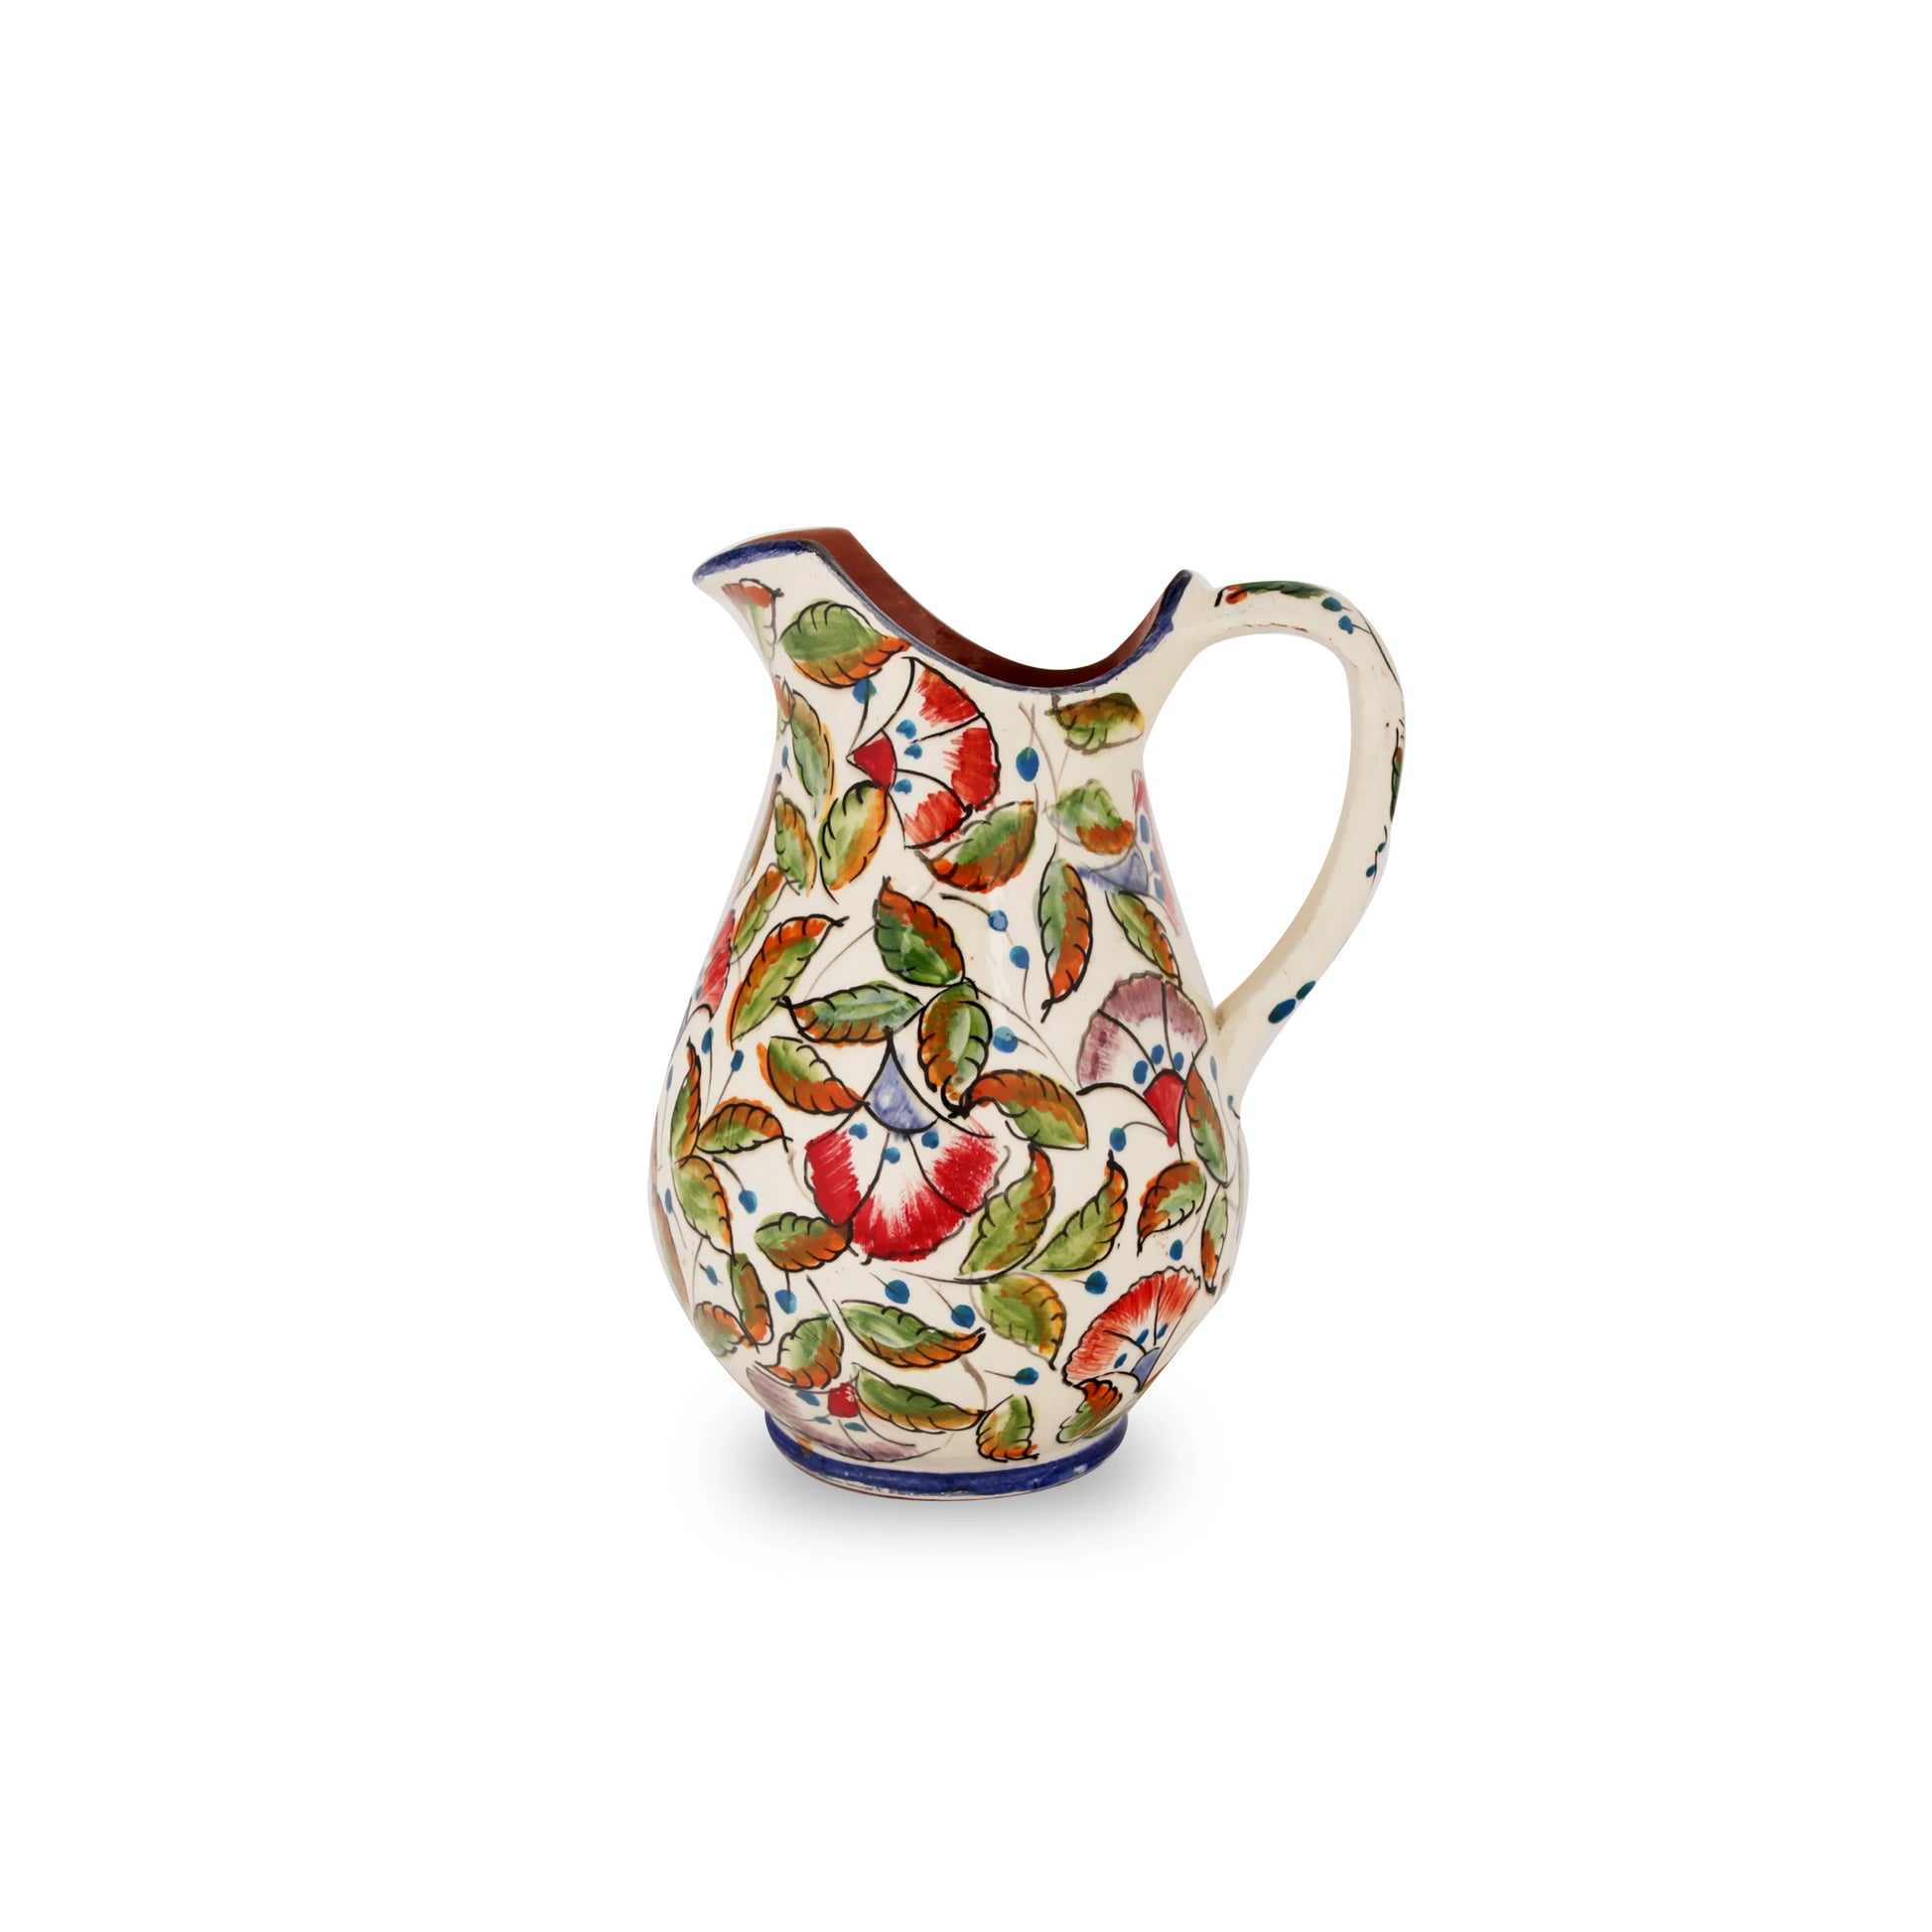 Authentic Moroccan Clay Water Serving Jug with Hand-Painted Floral Motifs